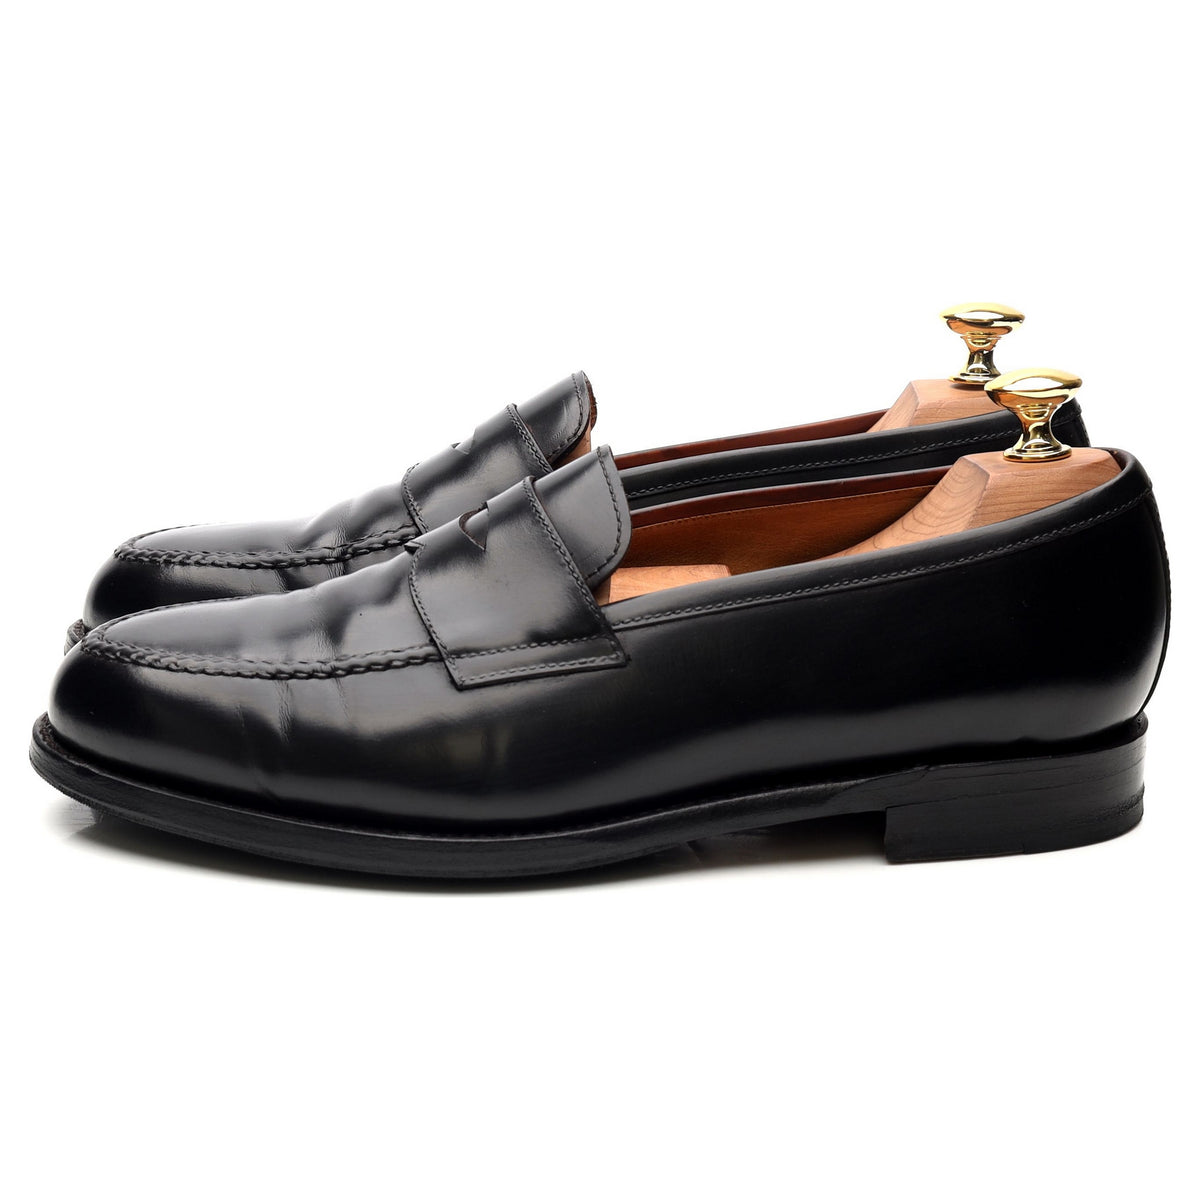 Black Leather Loafers UK 6.5